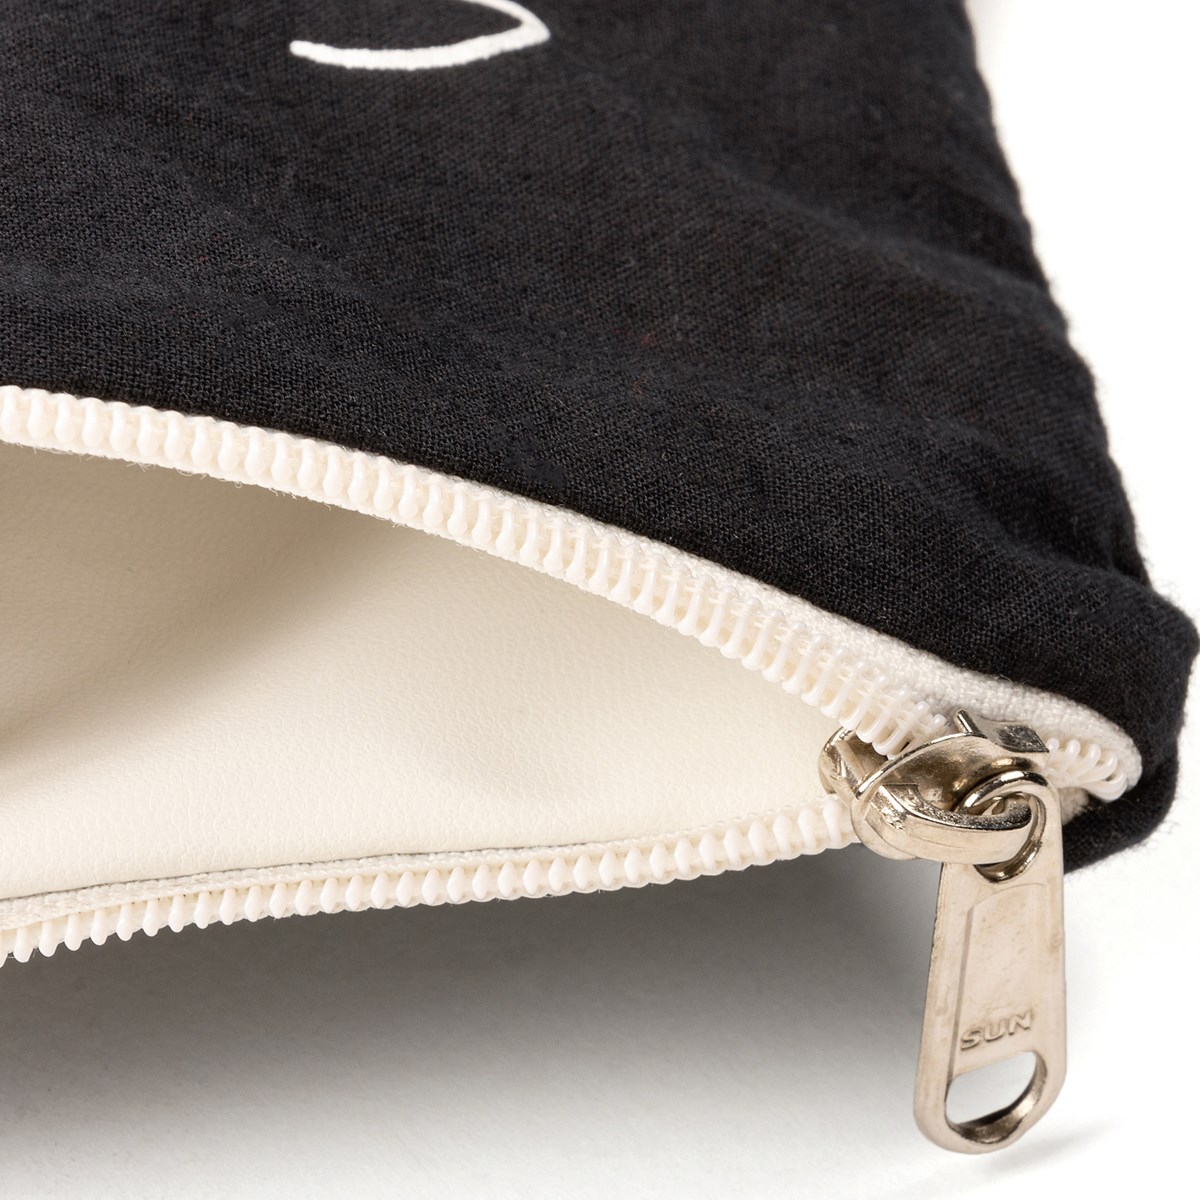 If I Lose This Bag Everything Pouch - Cotton, Faux Leather, Metal